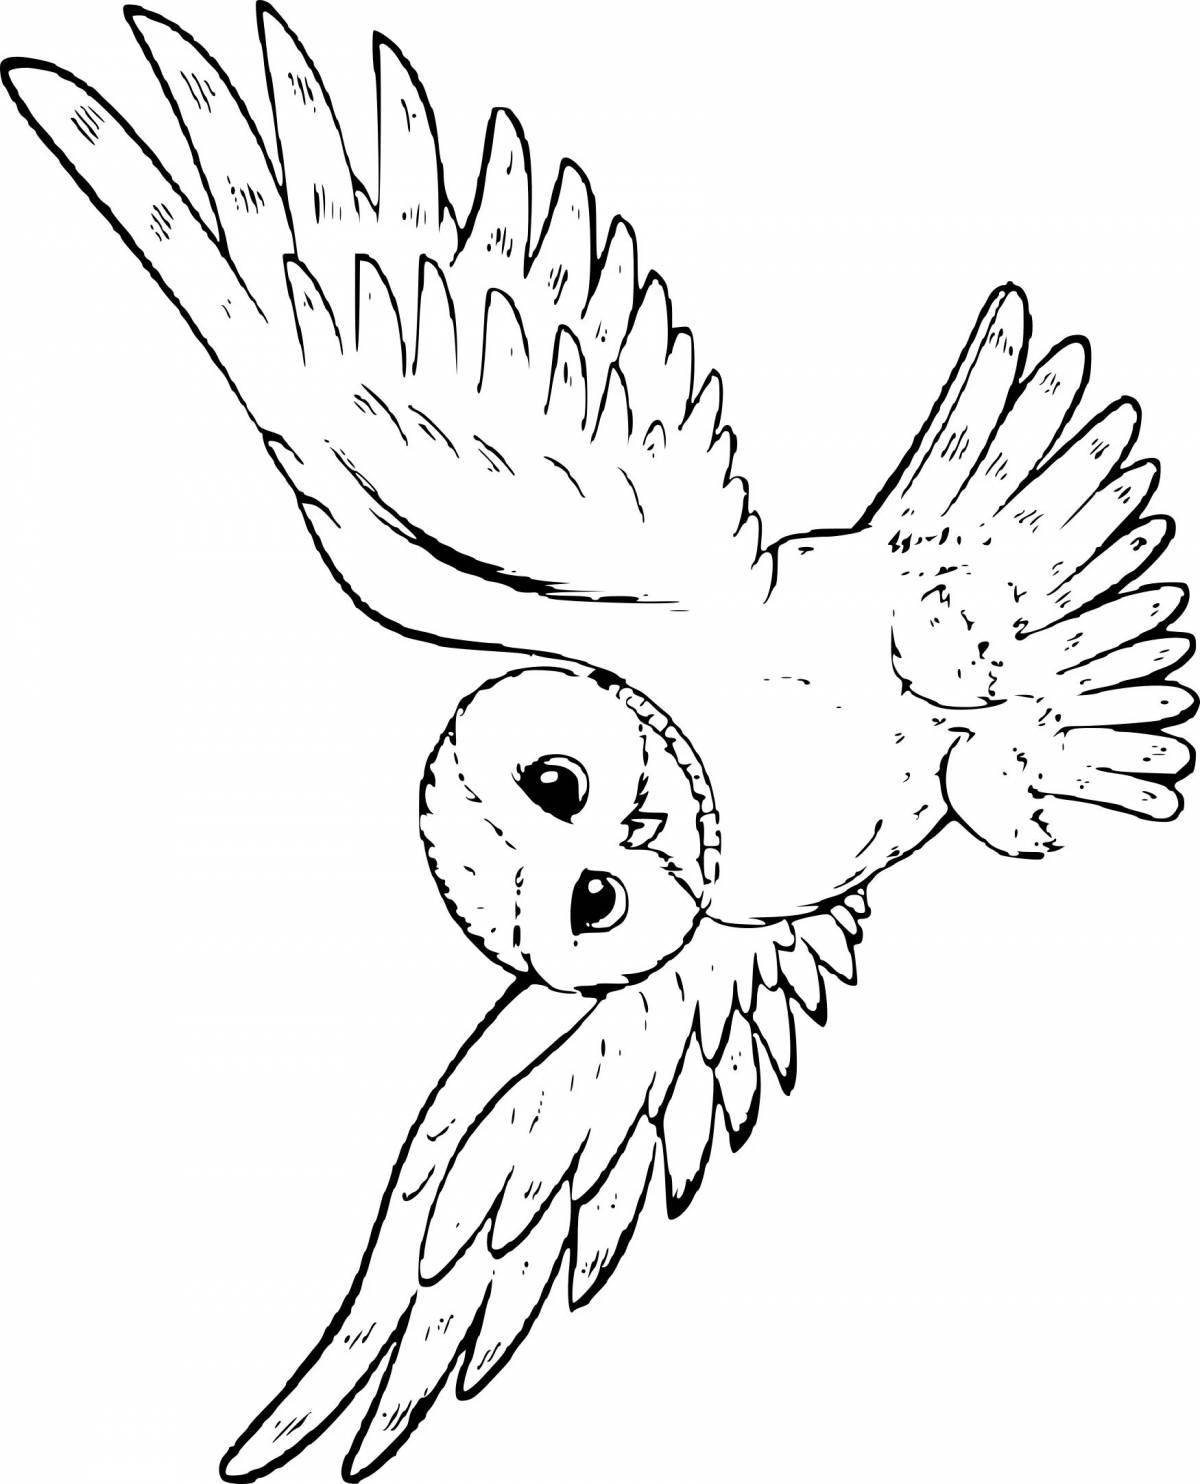 Exquisite hedwig owl coloring book